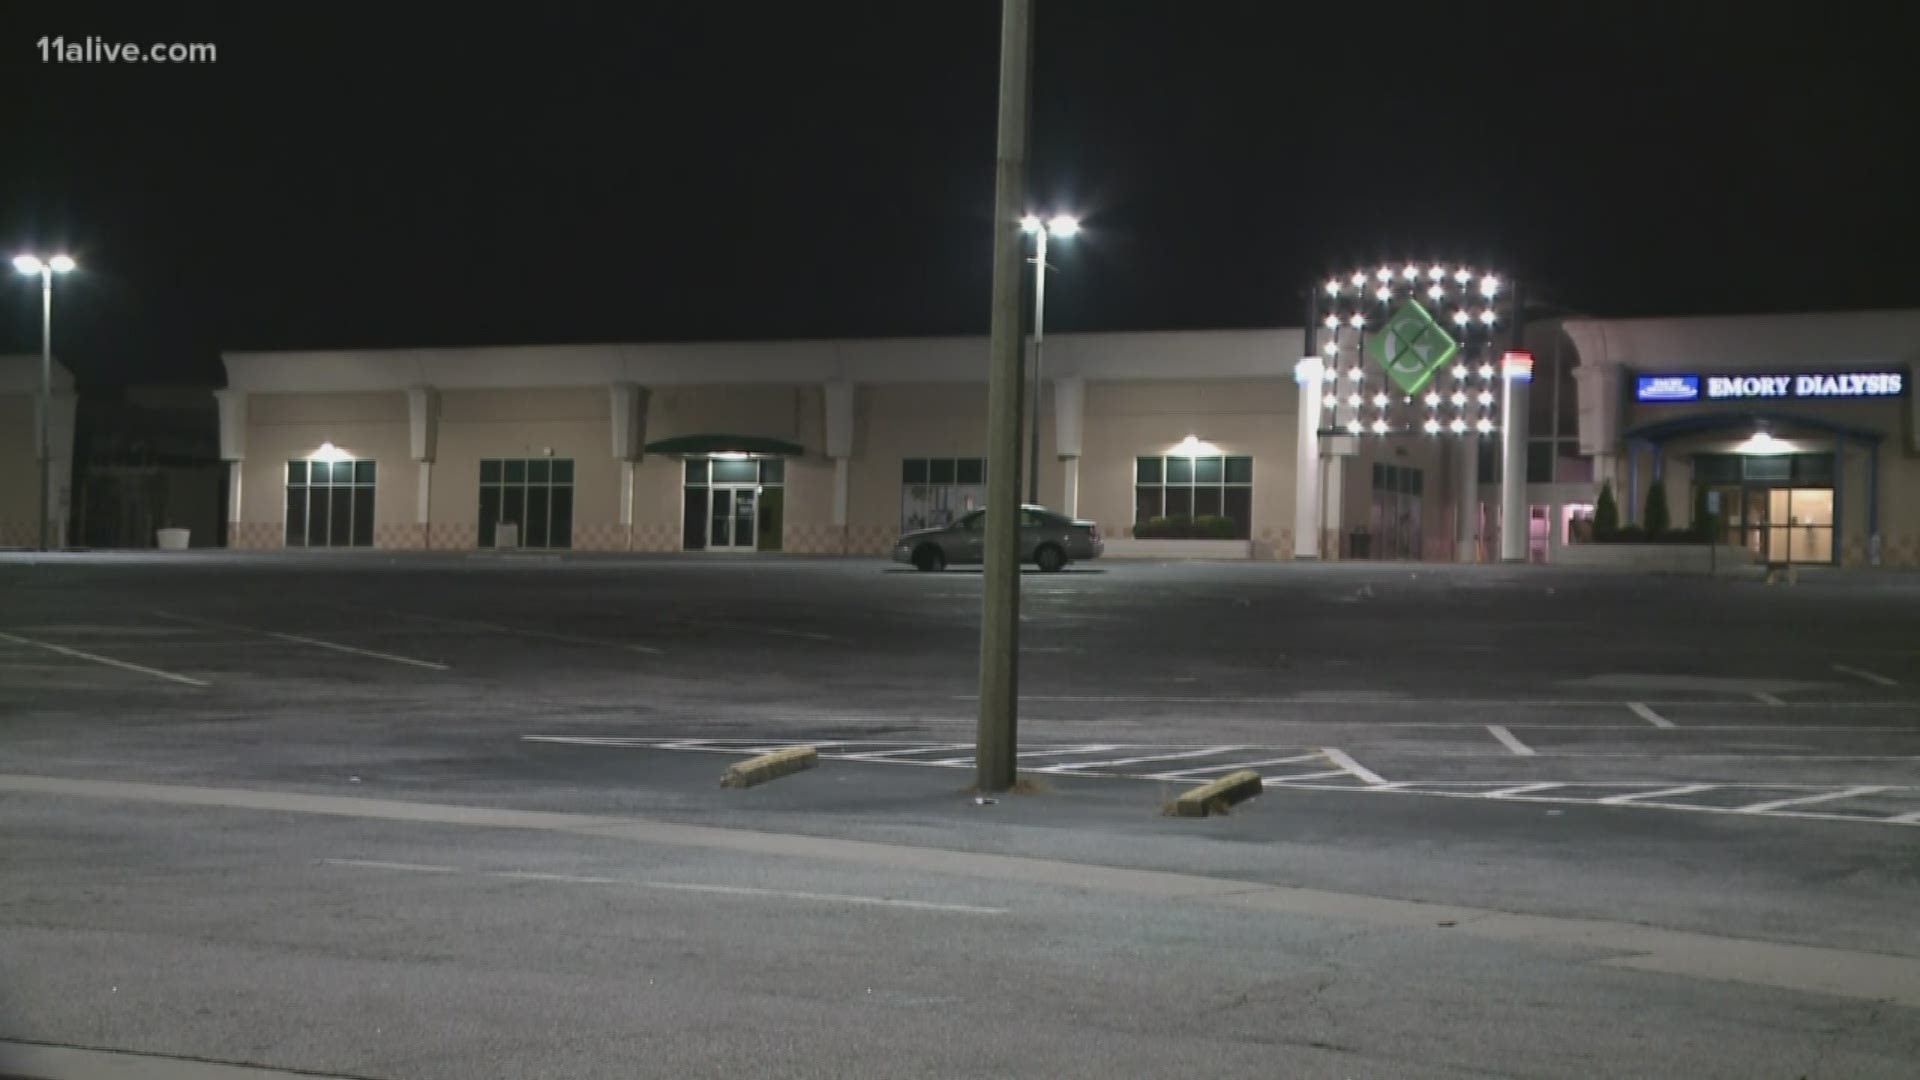 Police said the incident happened outside Greenbriar Mall around 8 p.m. on Friday.